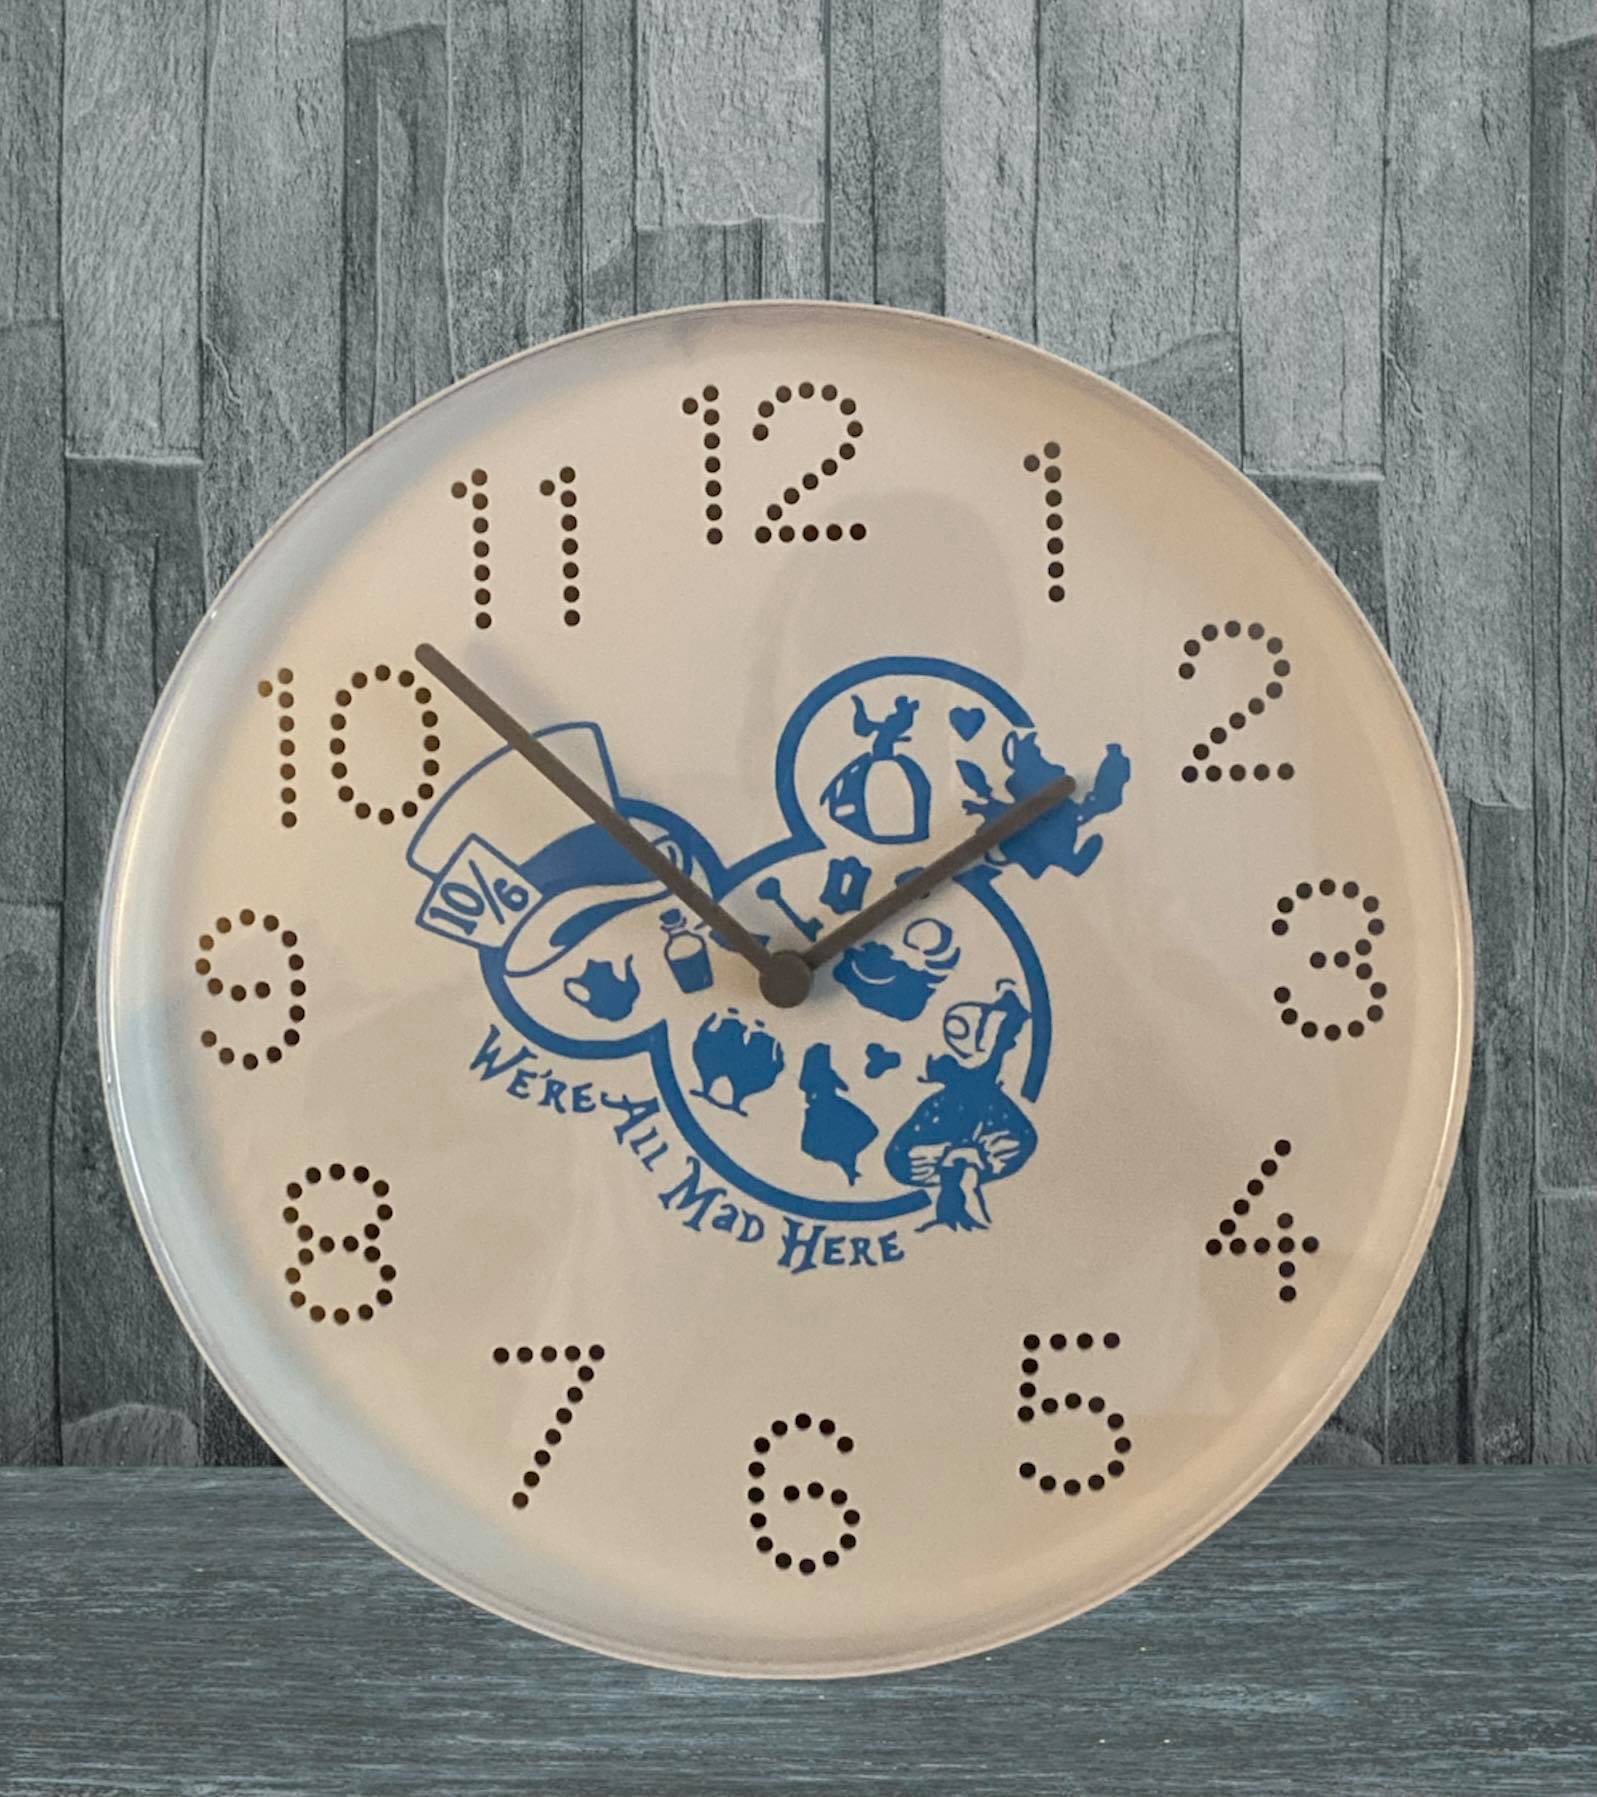 "WE'RE ALL MAD HERE" Clock